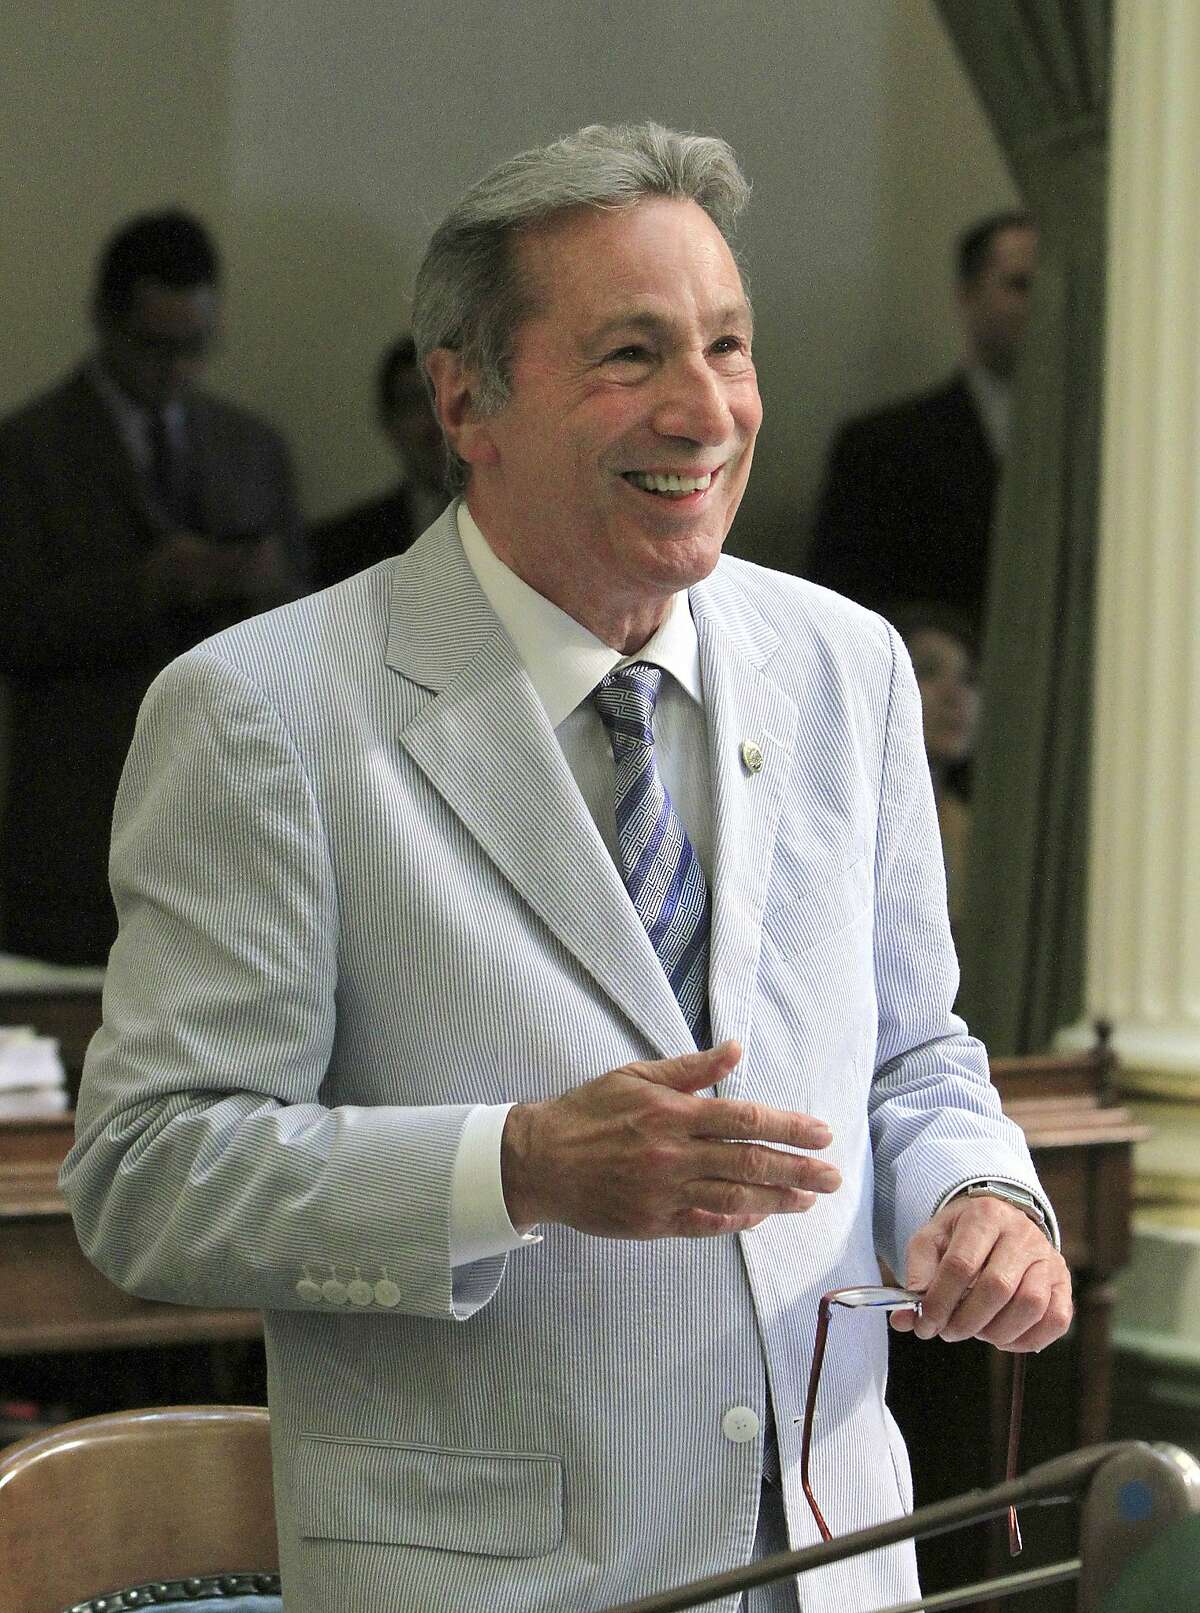 Assemblyman Tom Ammiano,D-San Francisco, smiles as his bill aimed at providing a framework for overseeing and regulating California's medical marijuana industry, was approved by the Assembly in Sacramento, Calif., Thursday, May 31, 2012. The measure AB2312, modeled after a ballot initiative that medical marijuana advocates crafted after the four federal prosecutors based in California launched a crackdown on dispensaries and growers, passed with the minimum number of 41 votes and sent to the Senate. (AP Photo/Rich Pedroncelli)